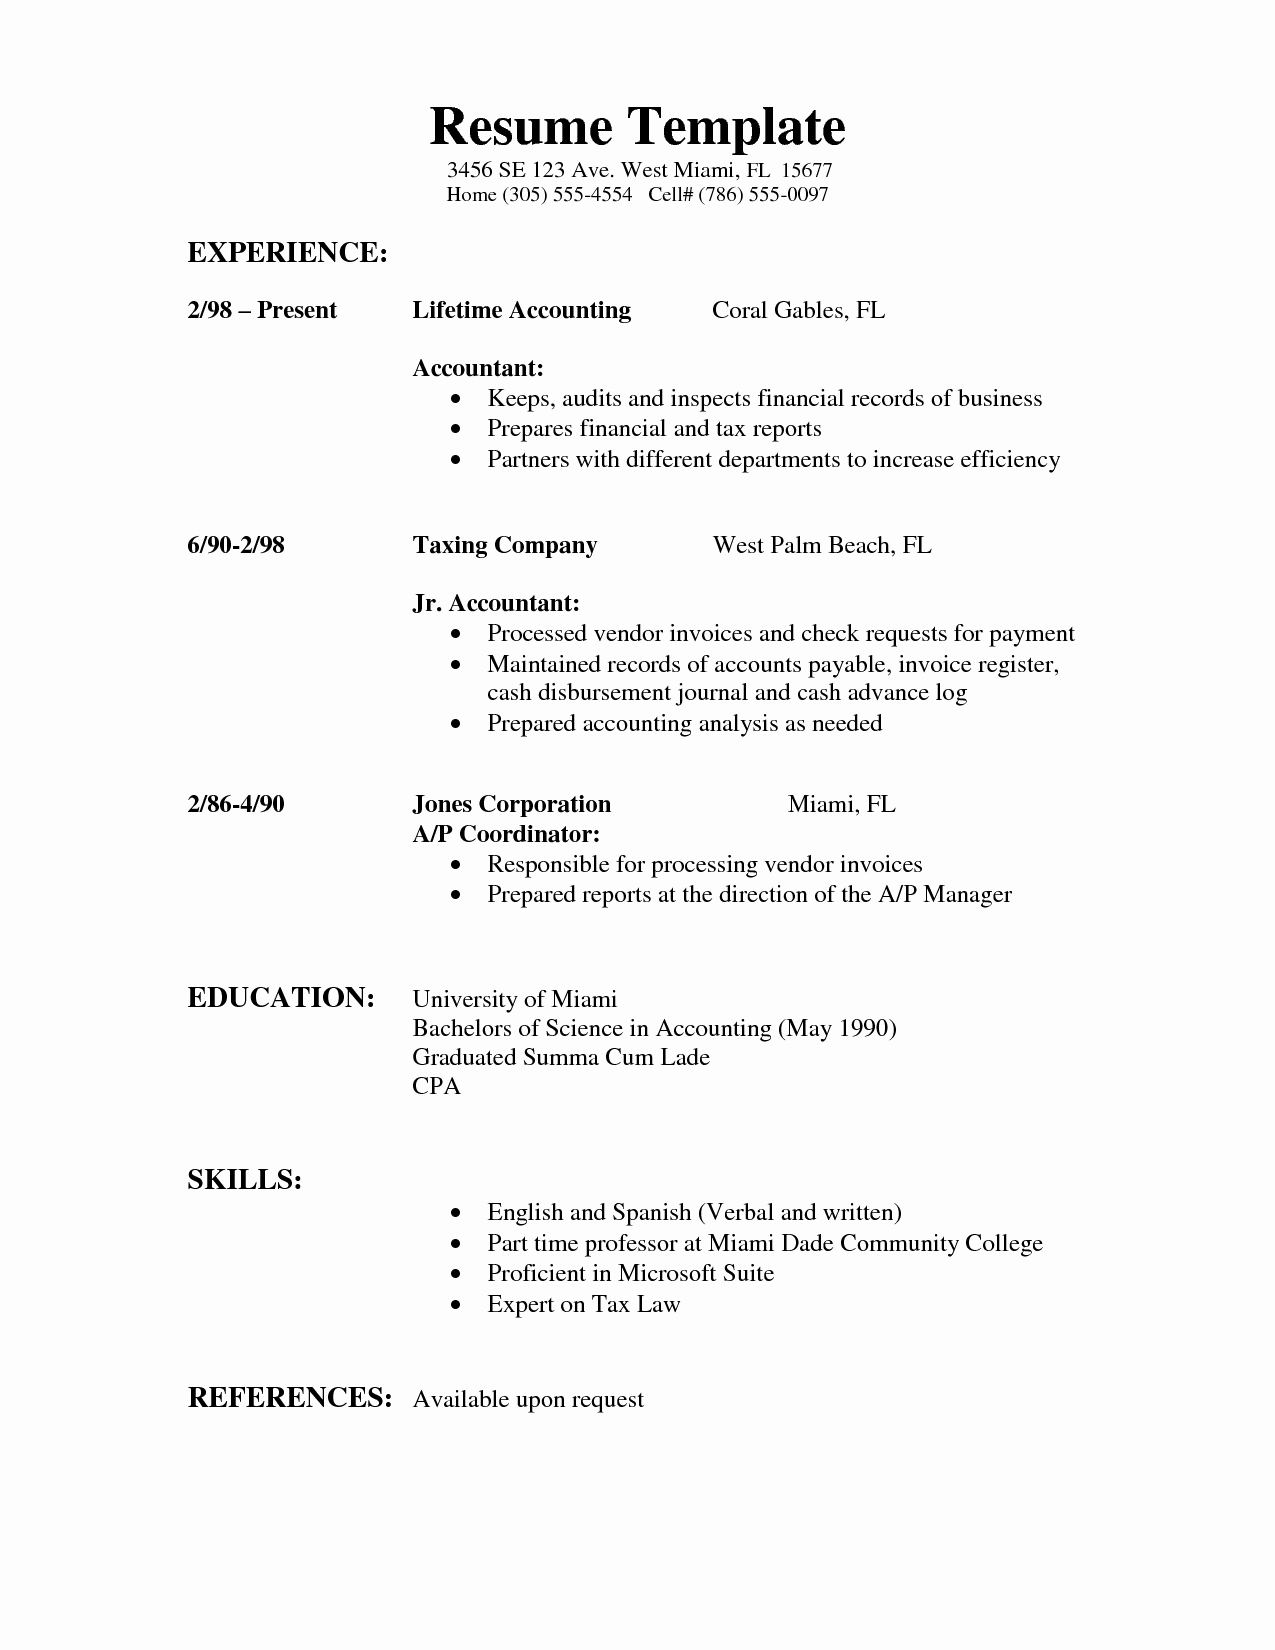 Samples Of A Basic Resume New Varieties Resume Templates and Samples